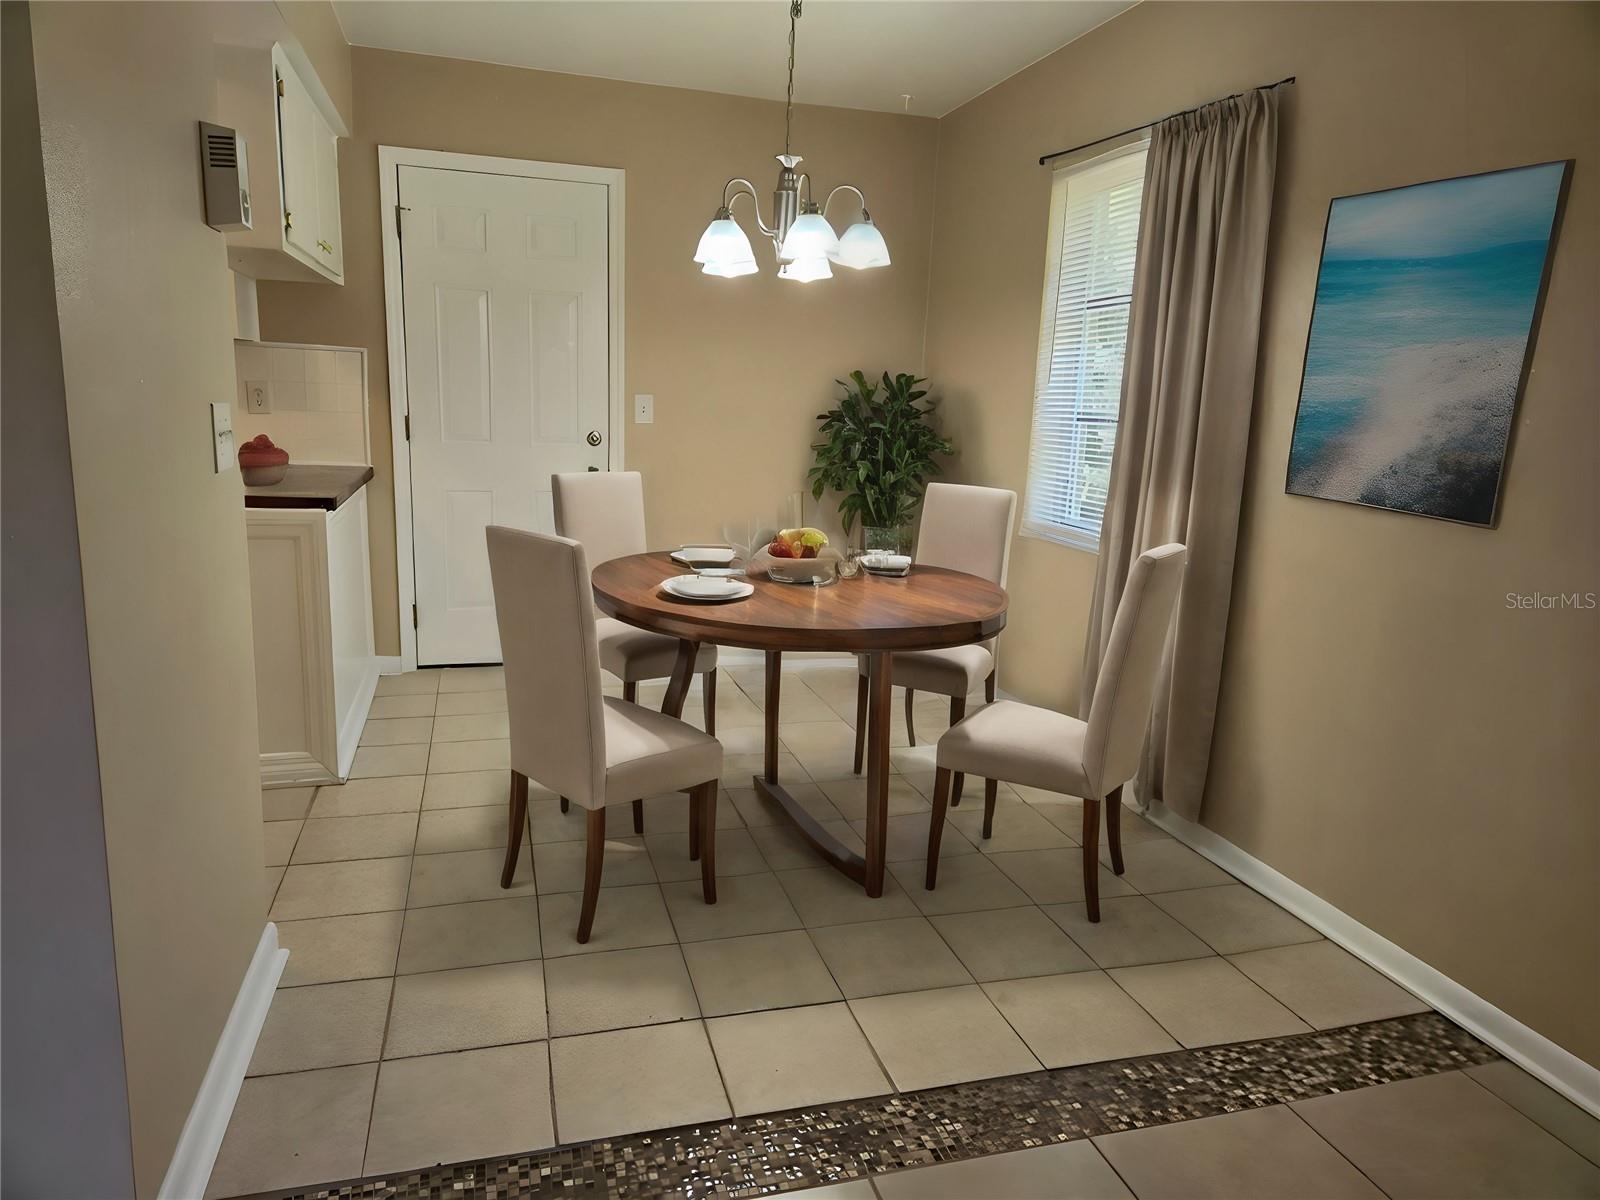 Separate dining room eating space